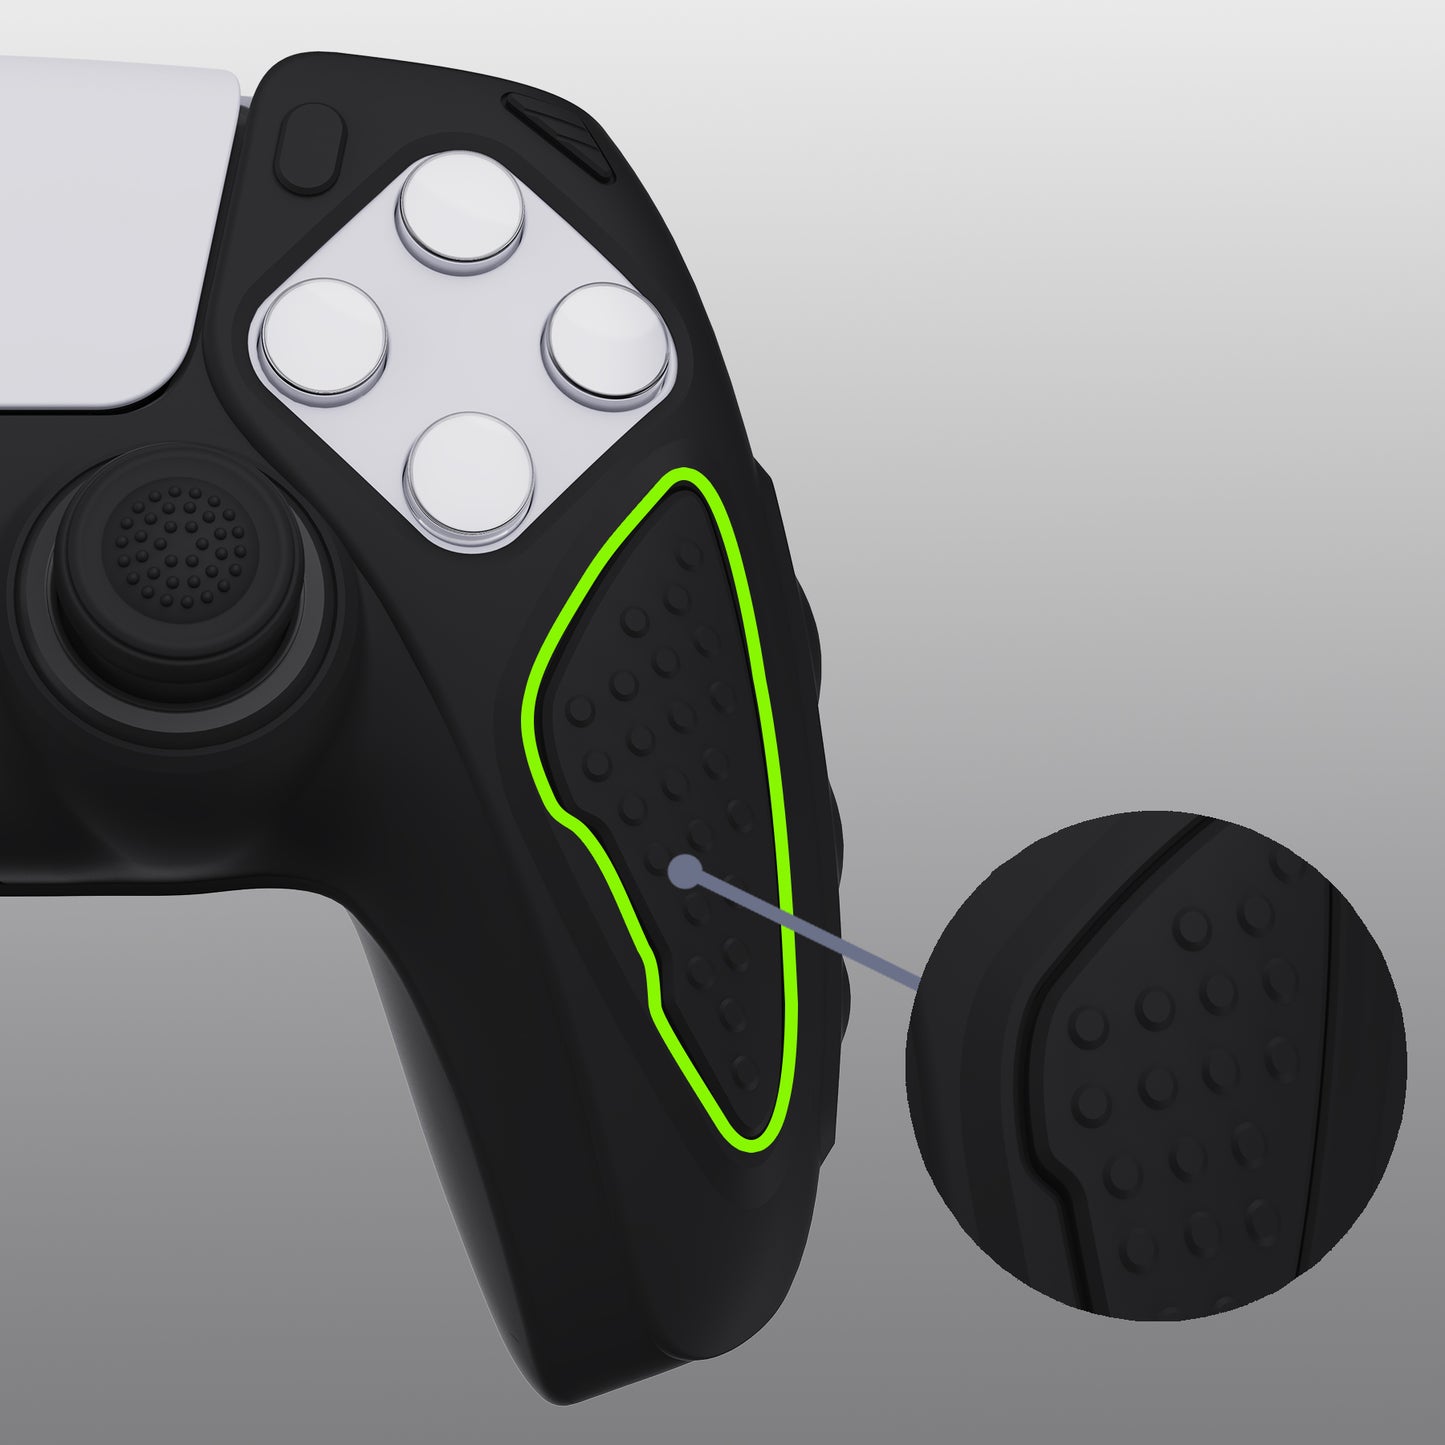 PlayVital Knight Edition Anti-Slip Silicone Cover Skin with Thumb Grip Caps for PS5 Wireless Controller - Black - QSPF001 PlayVital